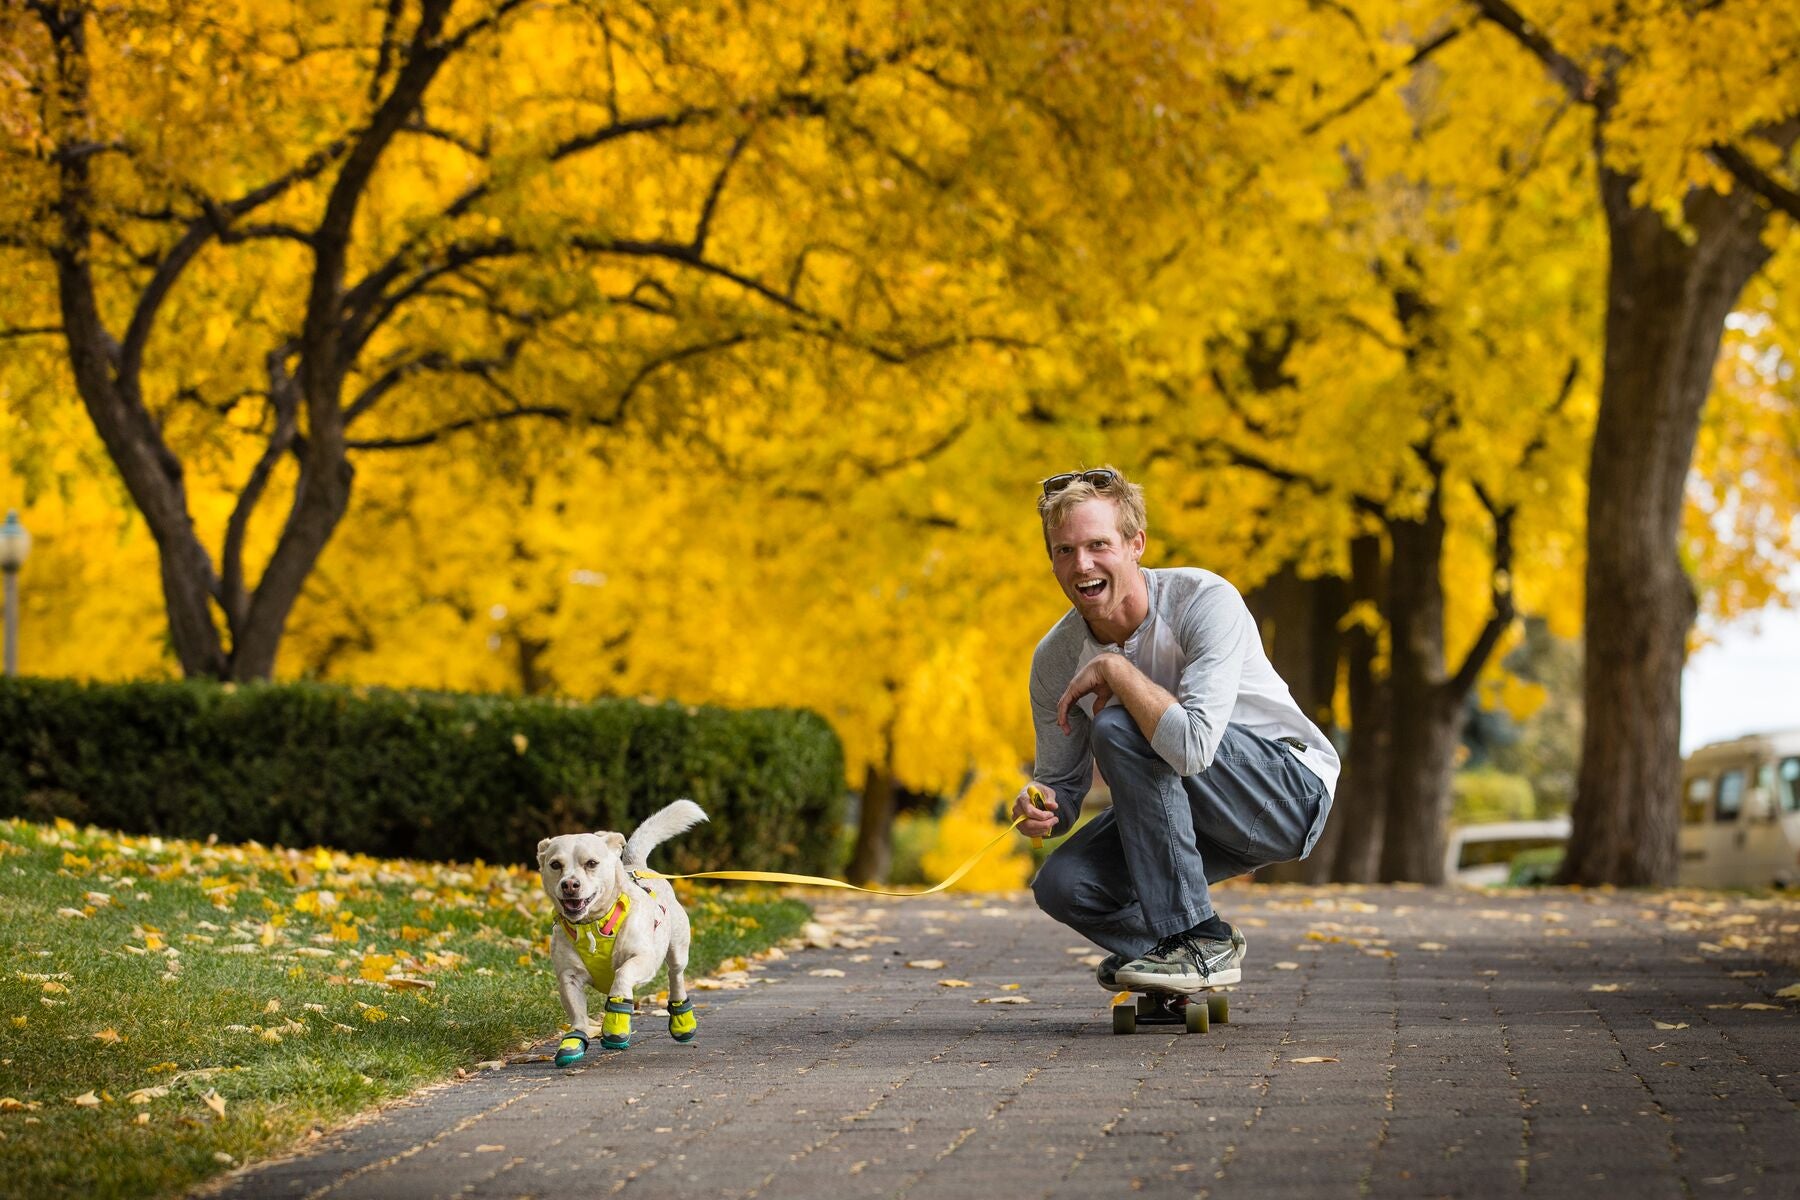 Man skateboard with his dog running next to him